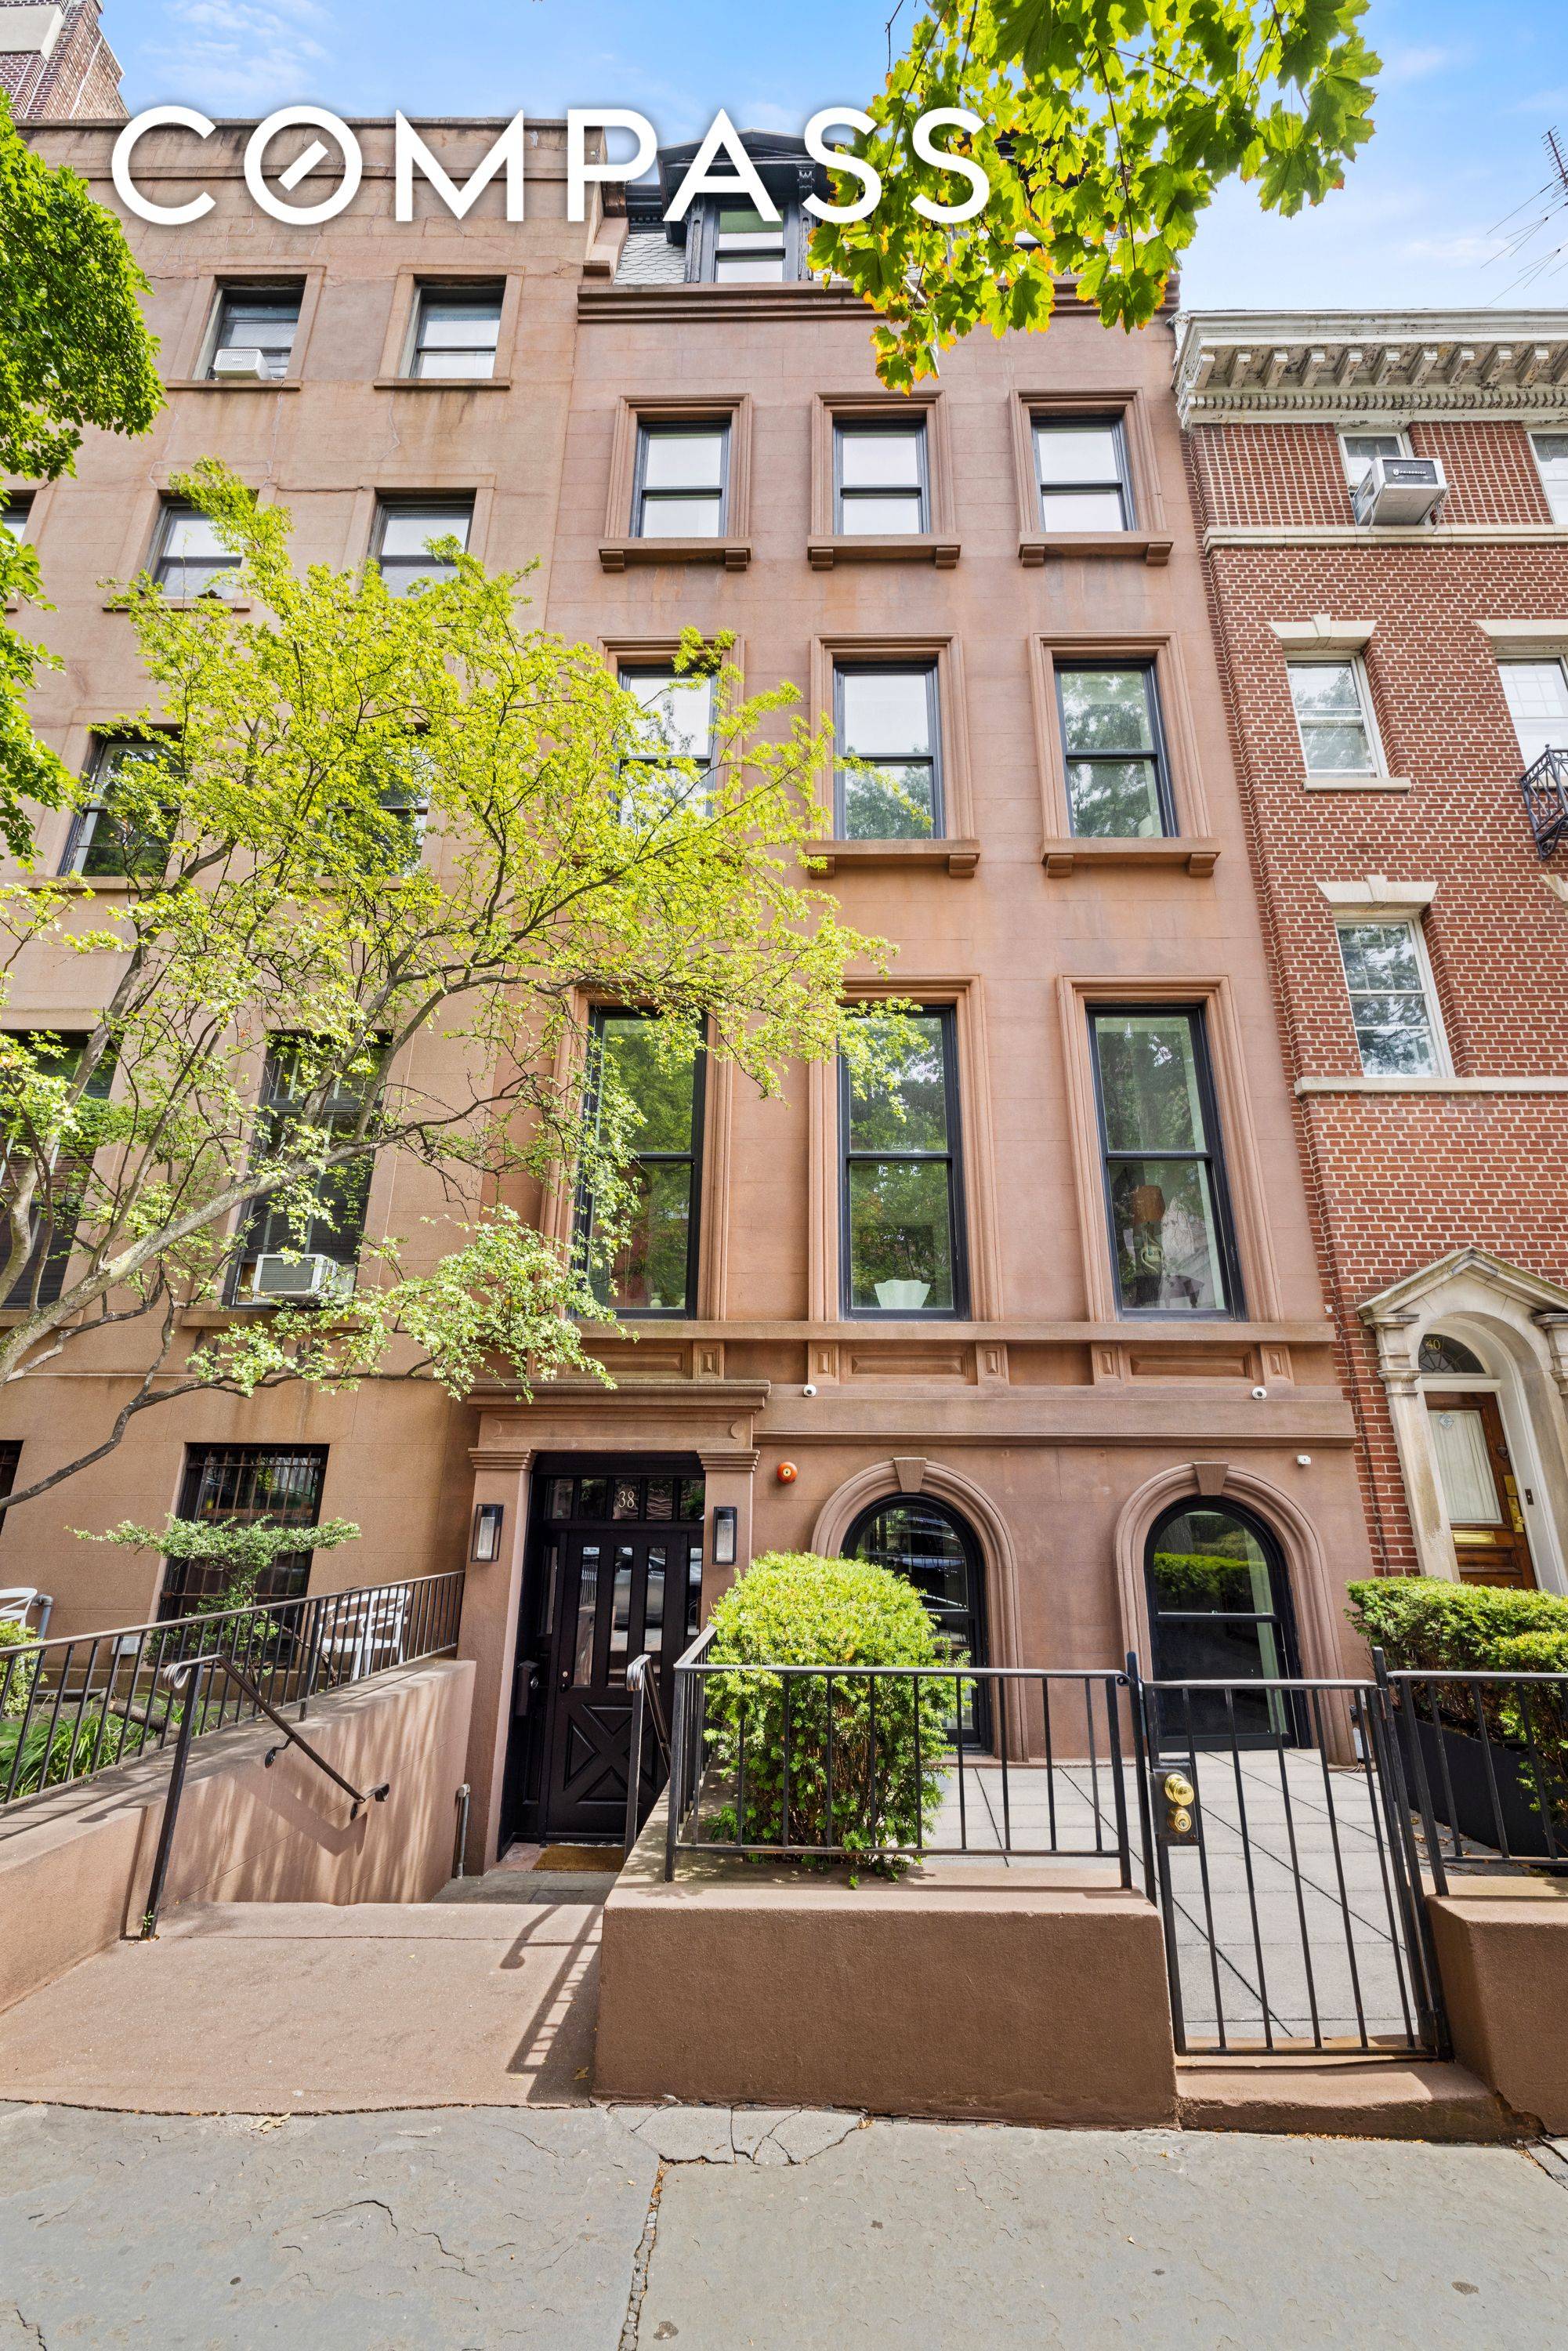 38 Monroe Place is a magnificent, luxury, mint condition, five story brownstone with an elevator.